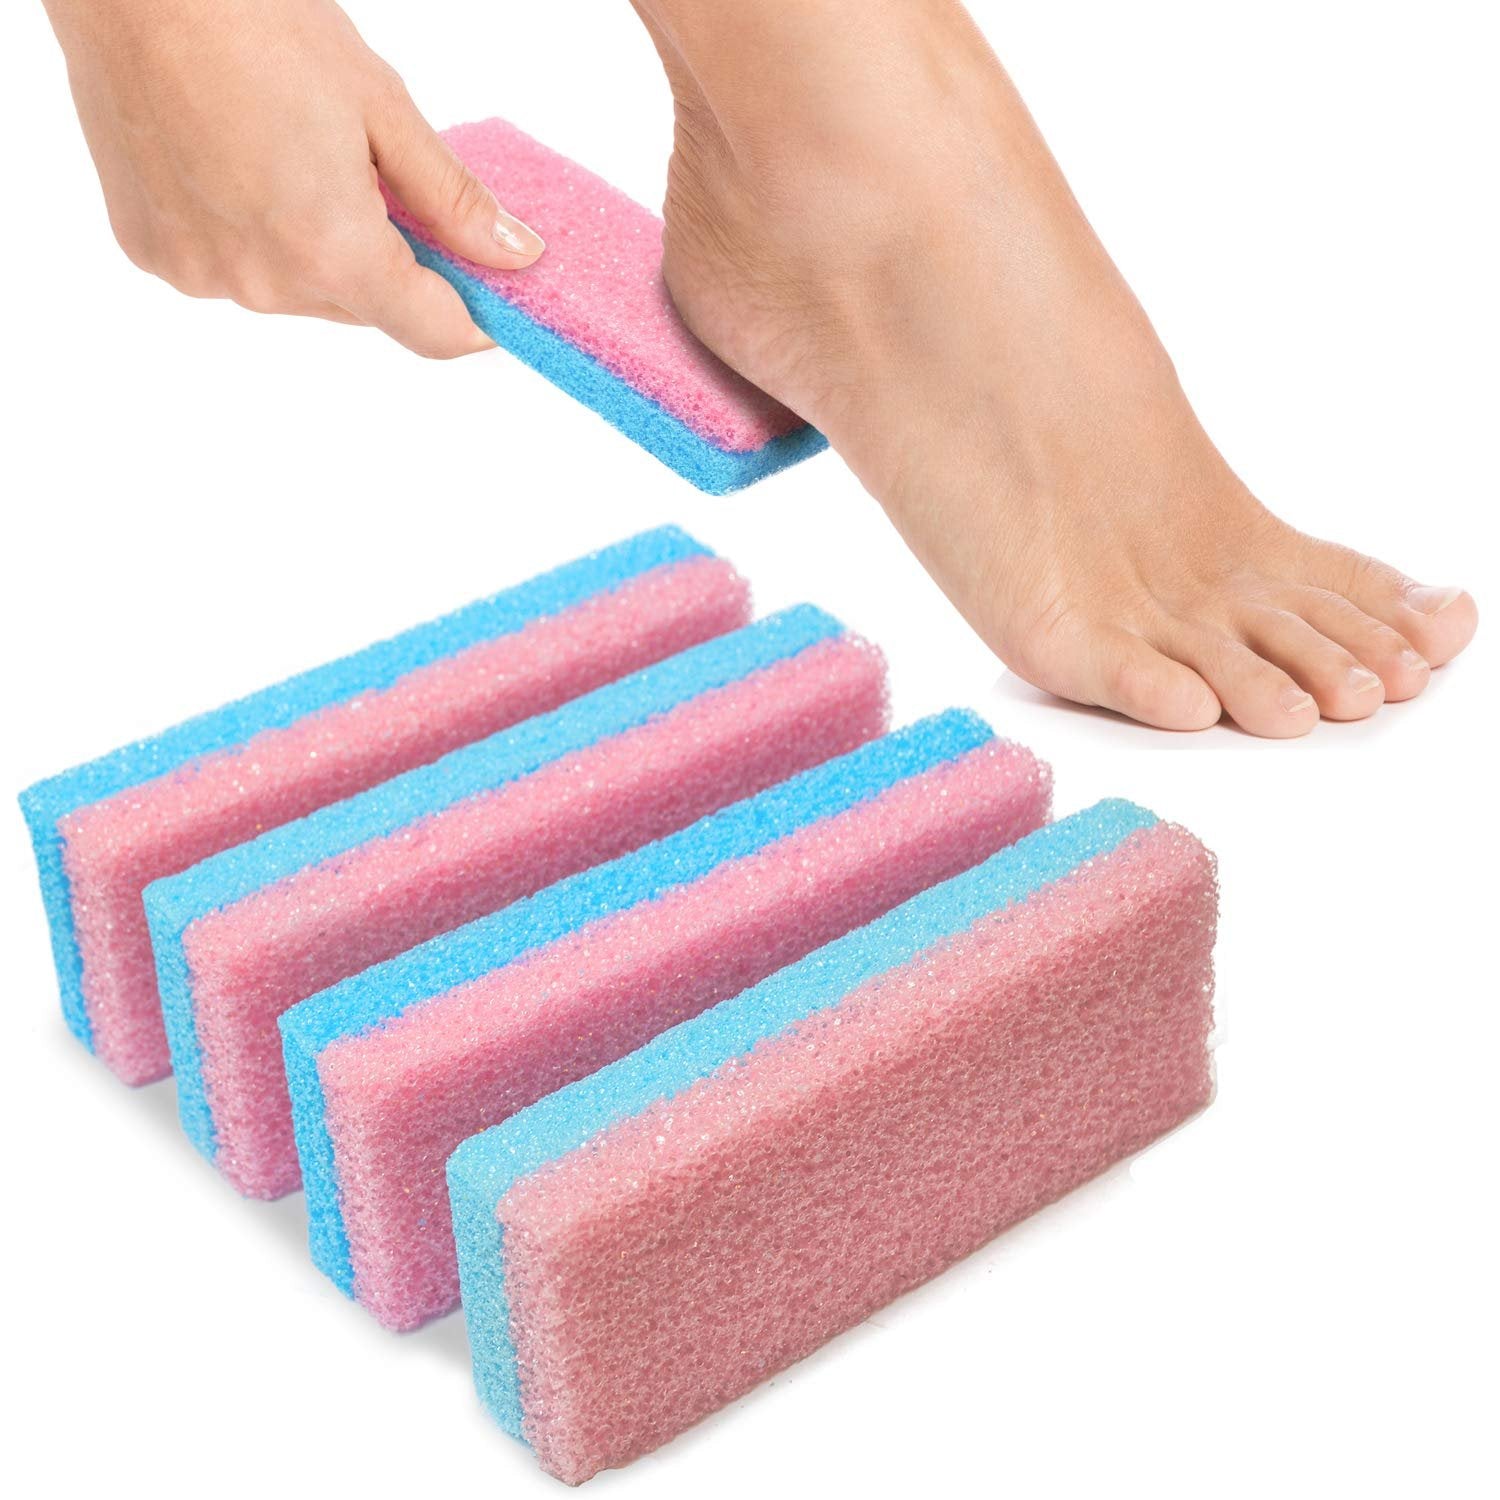 Tachibelle Spa Foot Pumice and Scrubber for Feet Heels Callus and Dead Skins, Remove and Smooths Rough Callus Heels (Pack of 4)